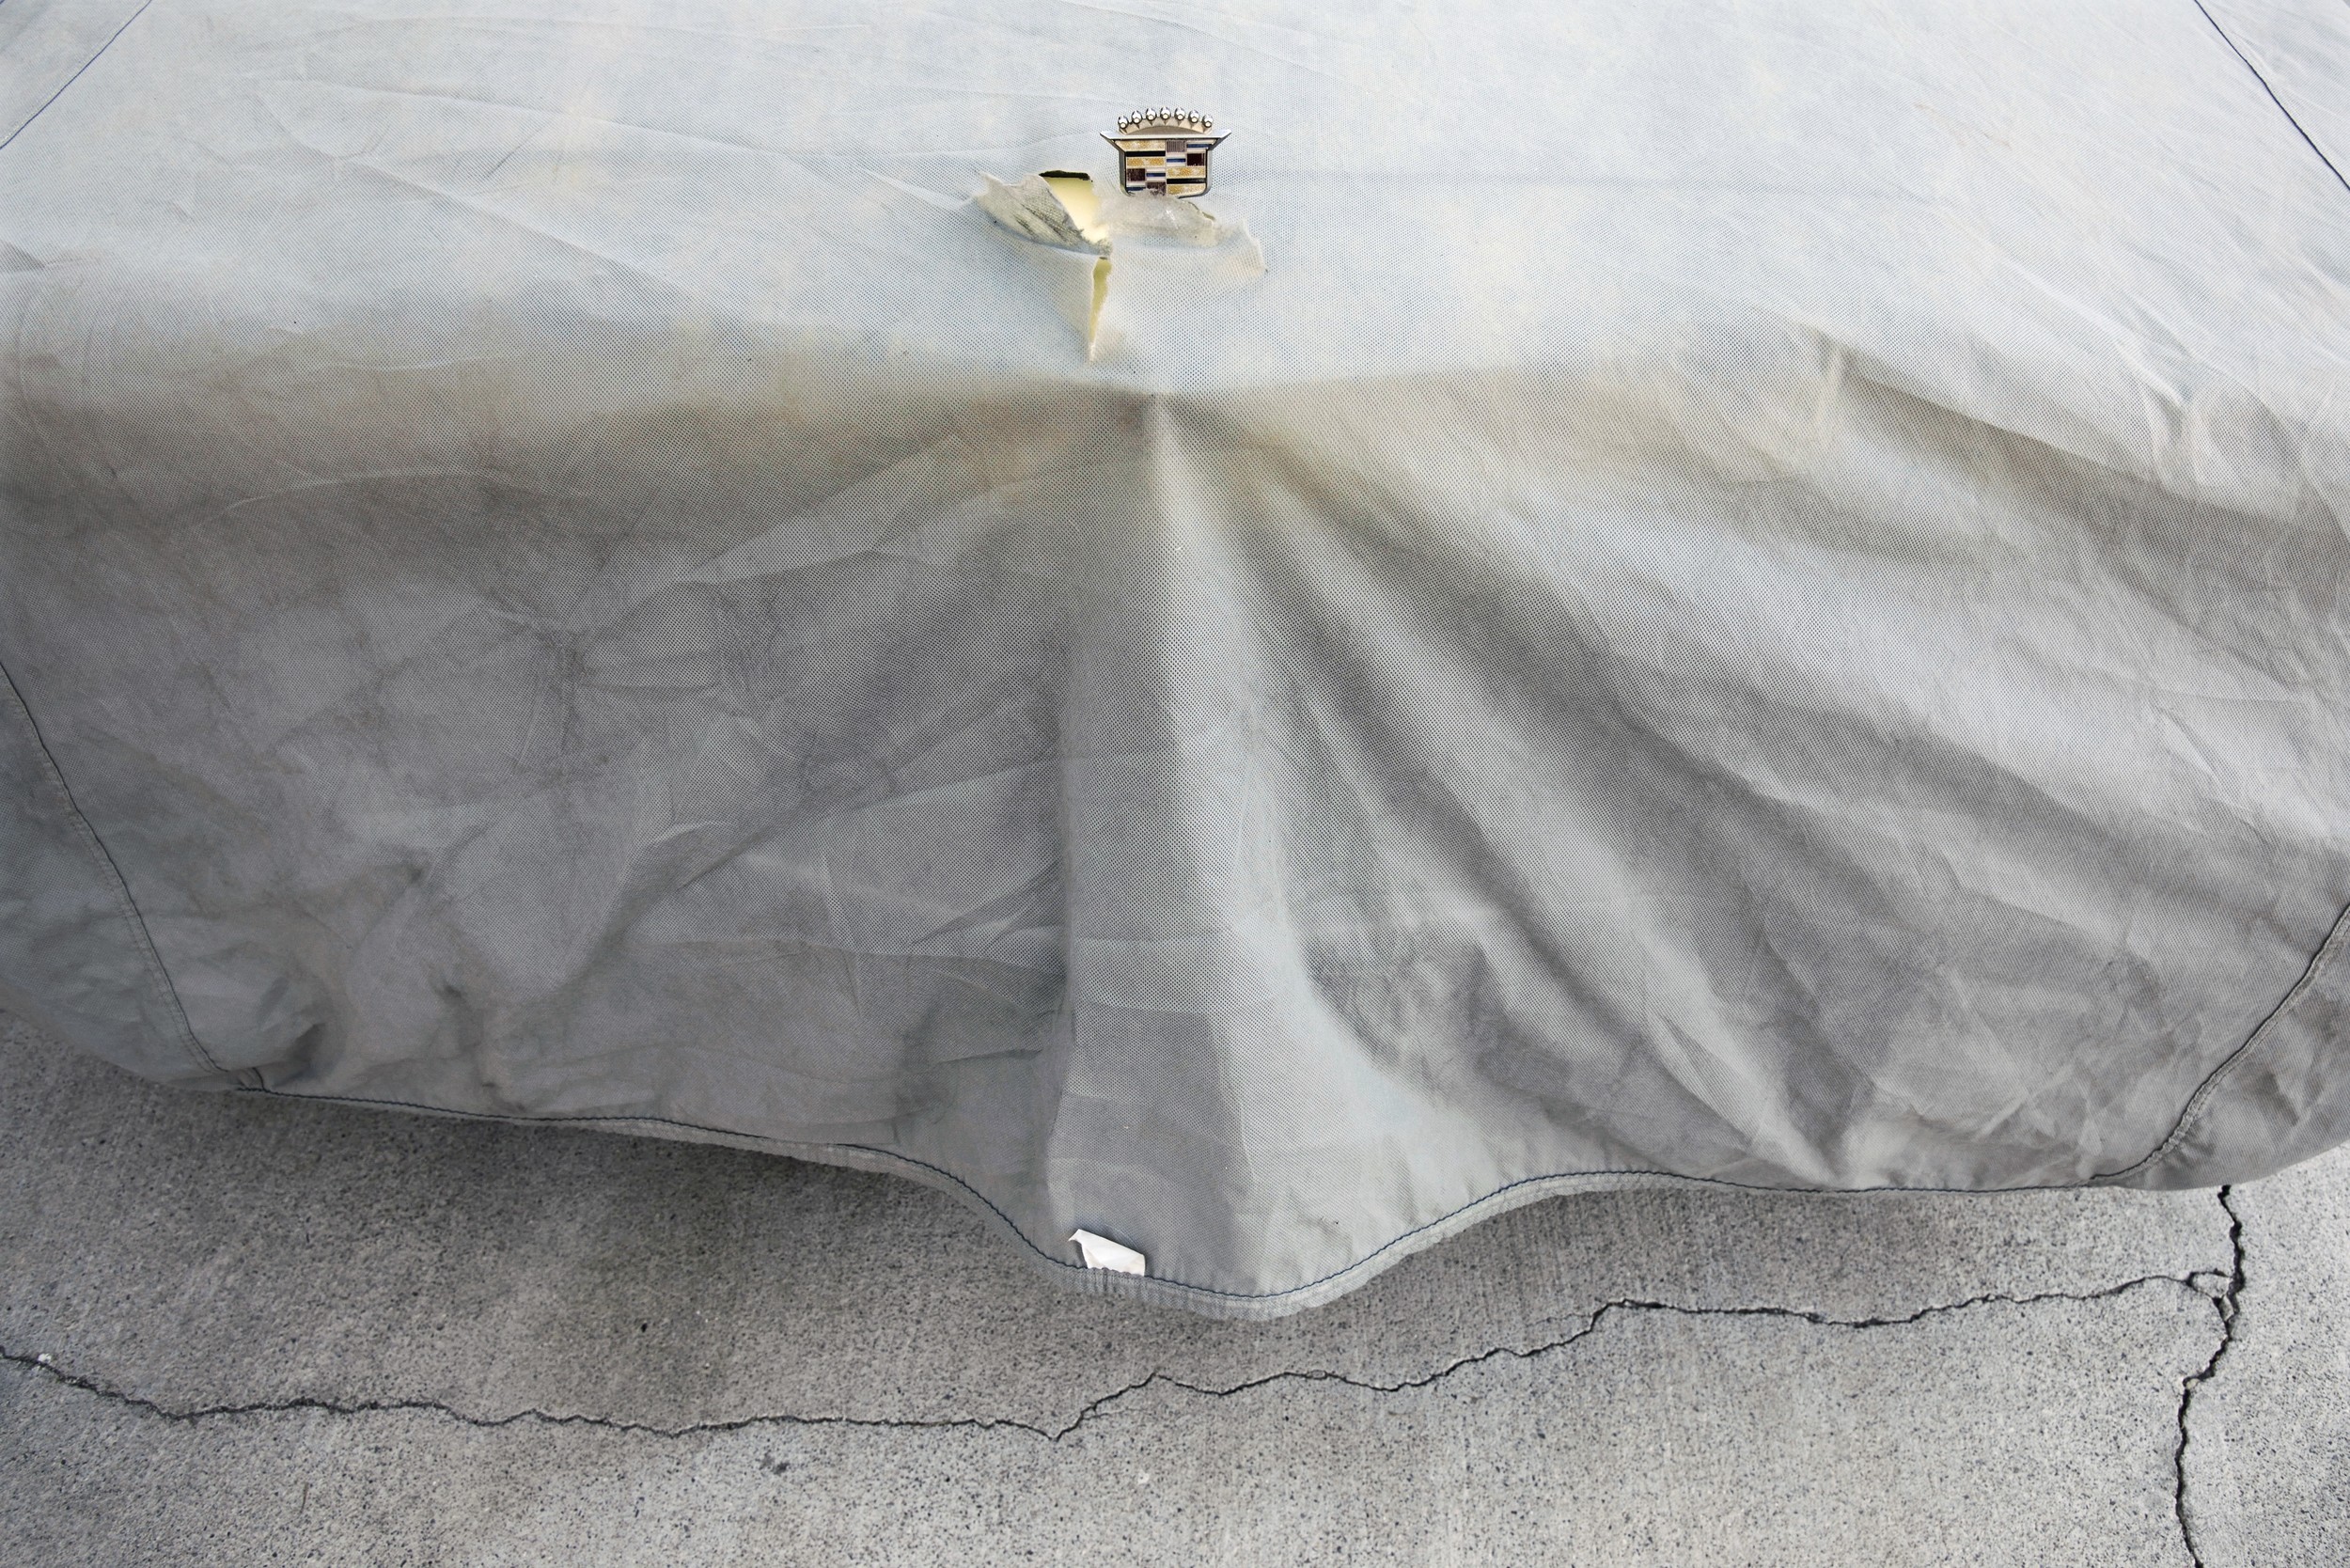   Cadillac Under Cover,   2014   